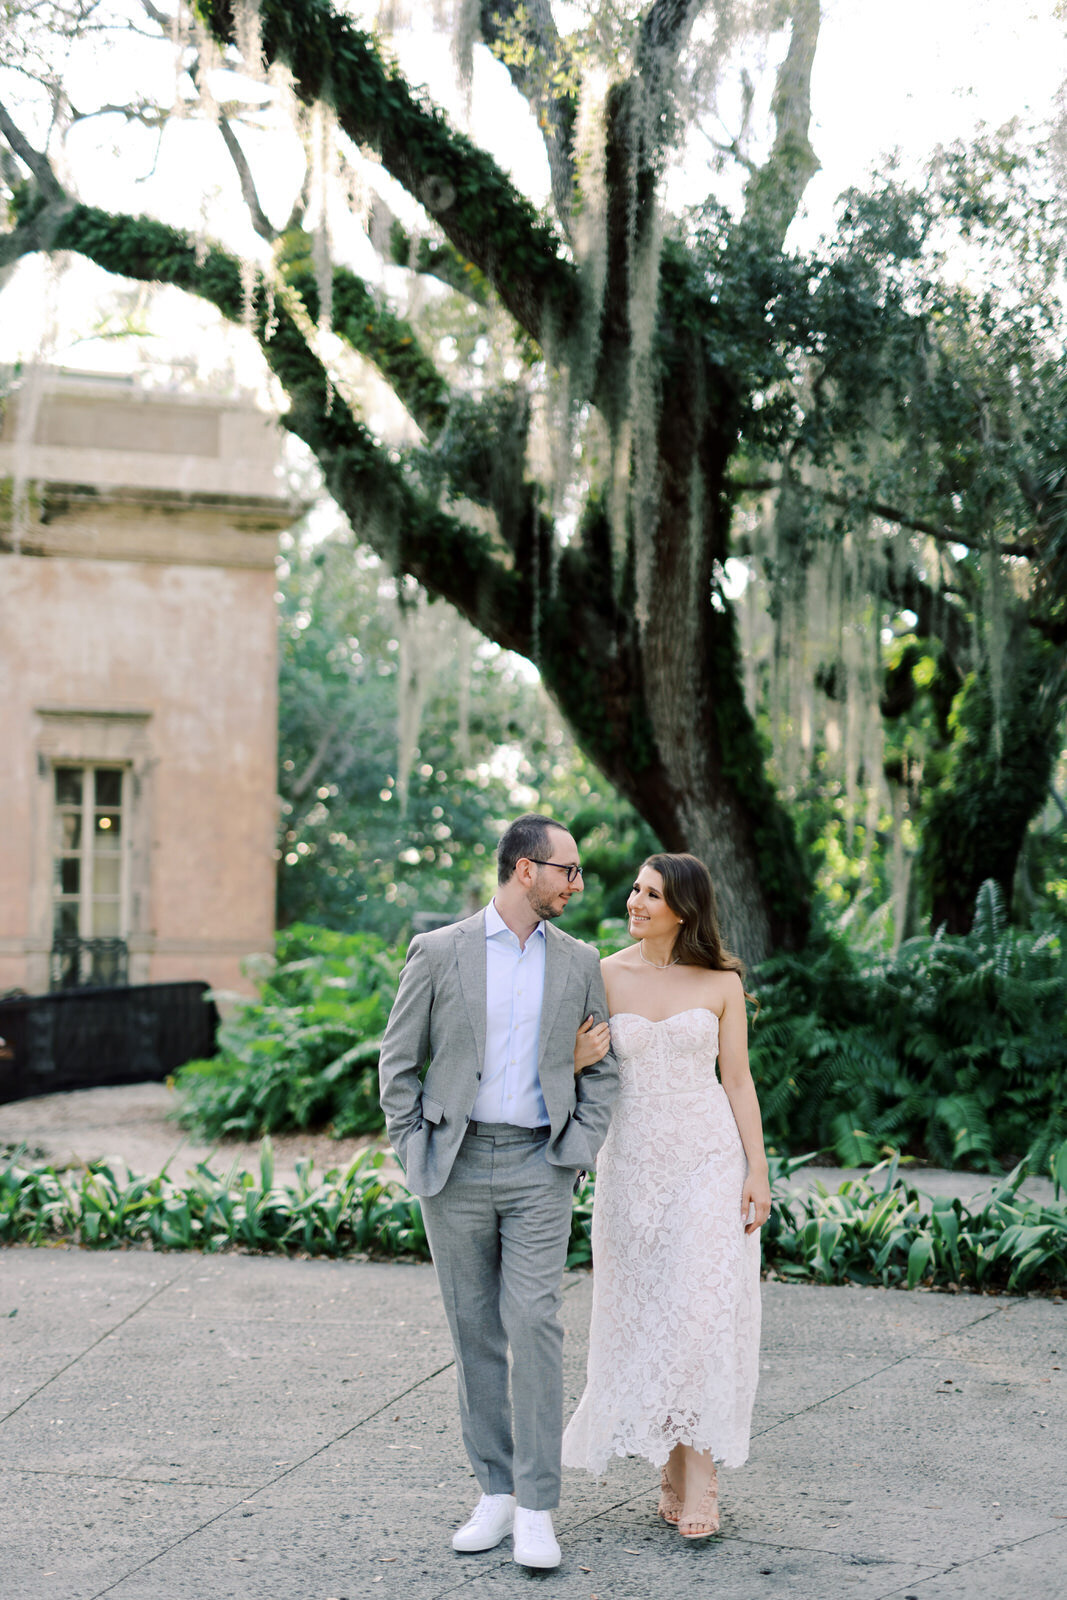 A Stylish and Chic Engagement Session at Vizcaya Museum in Miami Florida 22